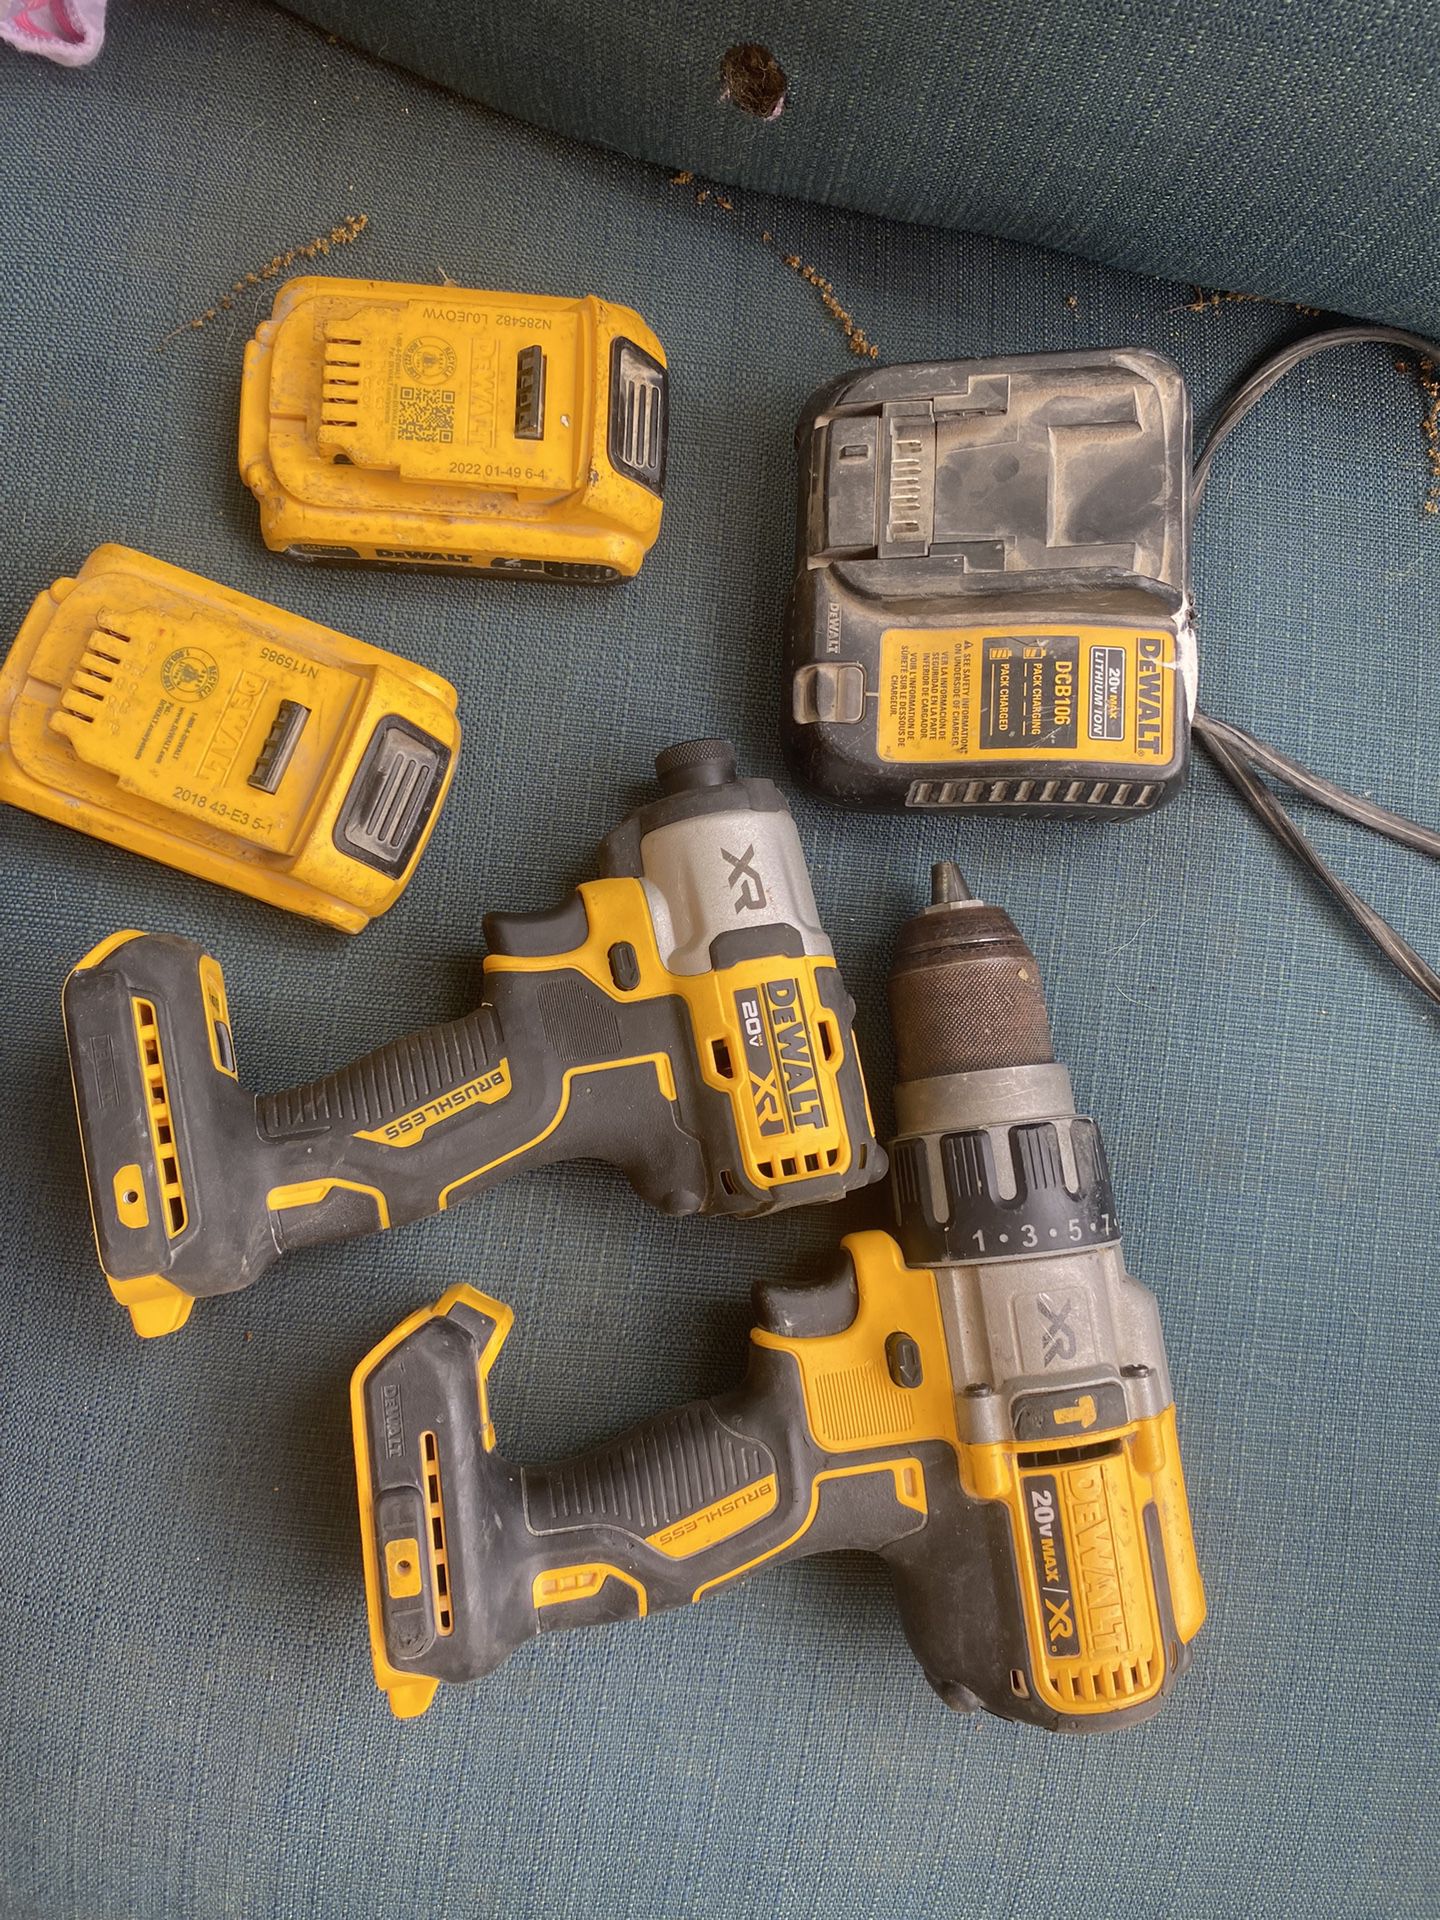 Dewalt Hammer Drill And Compact Drill